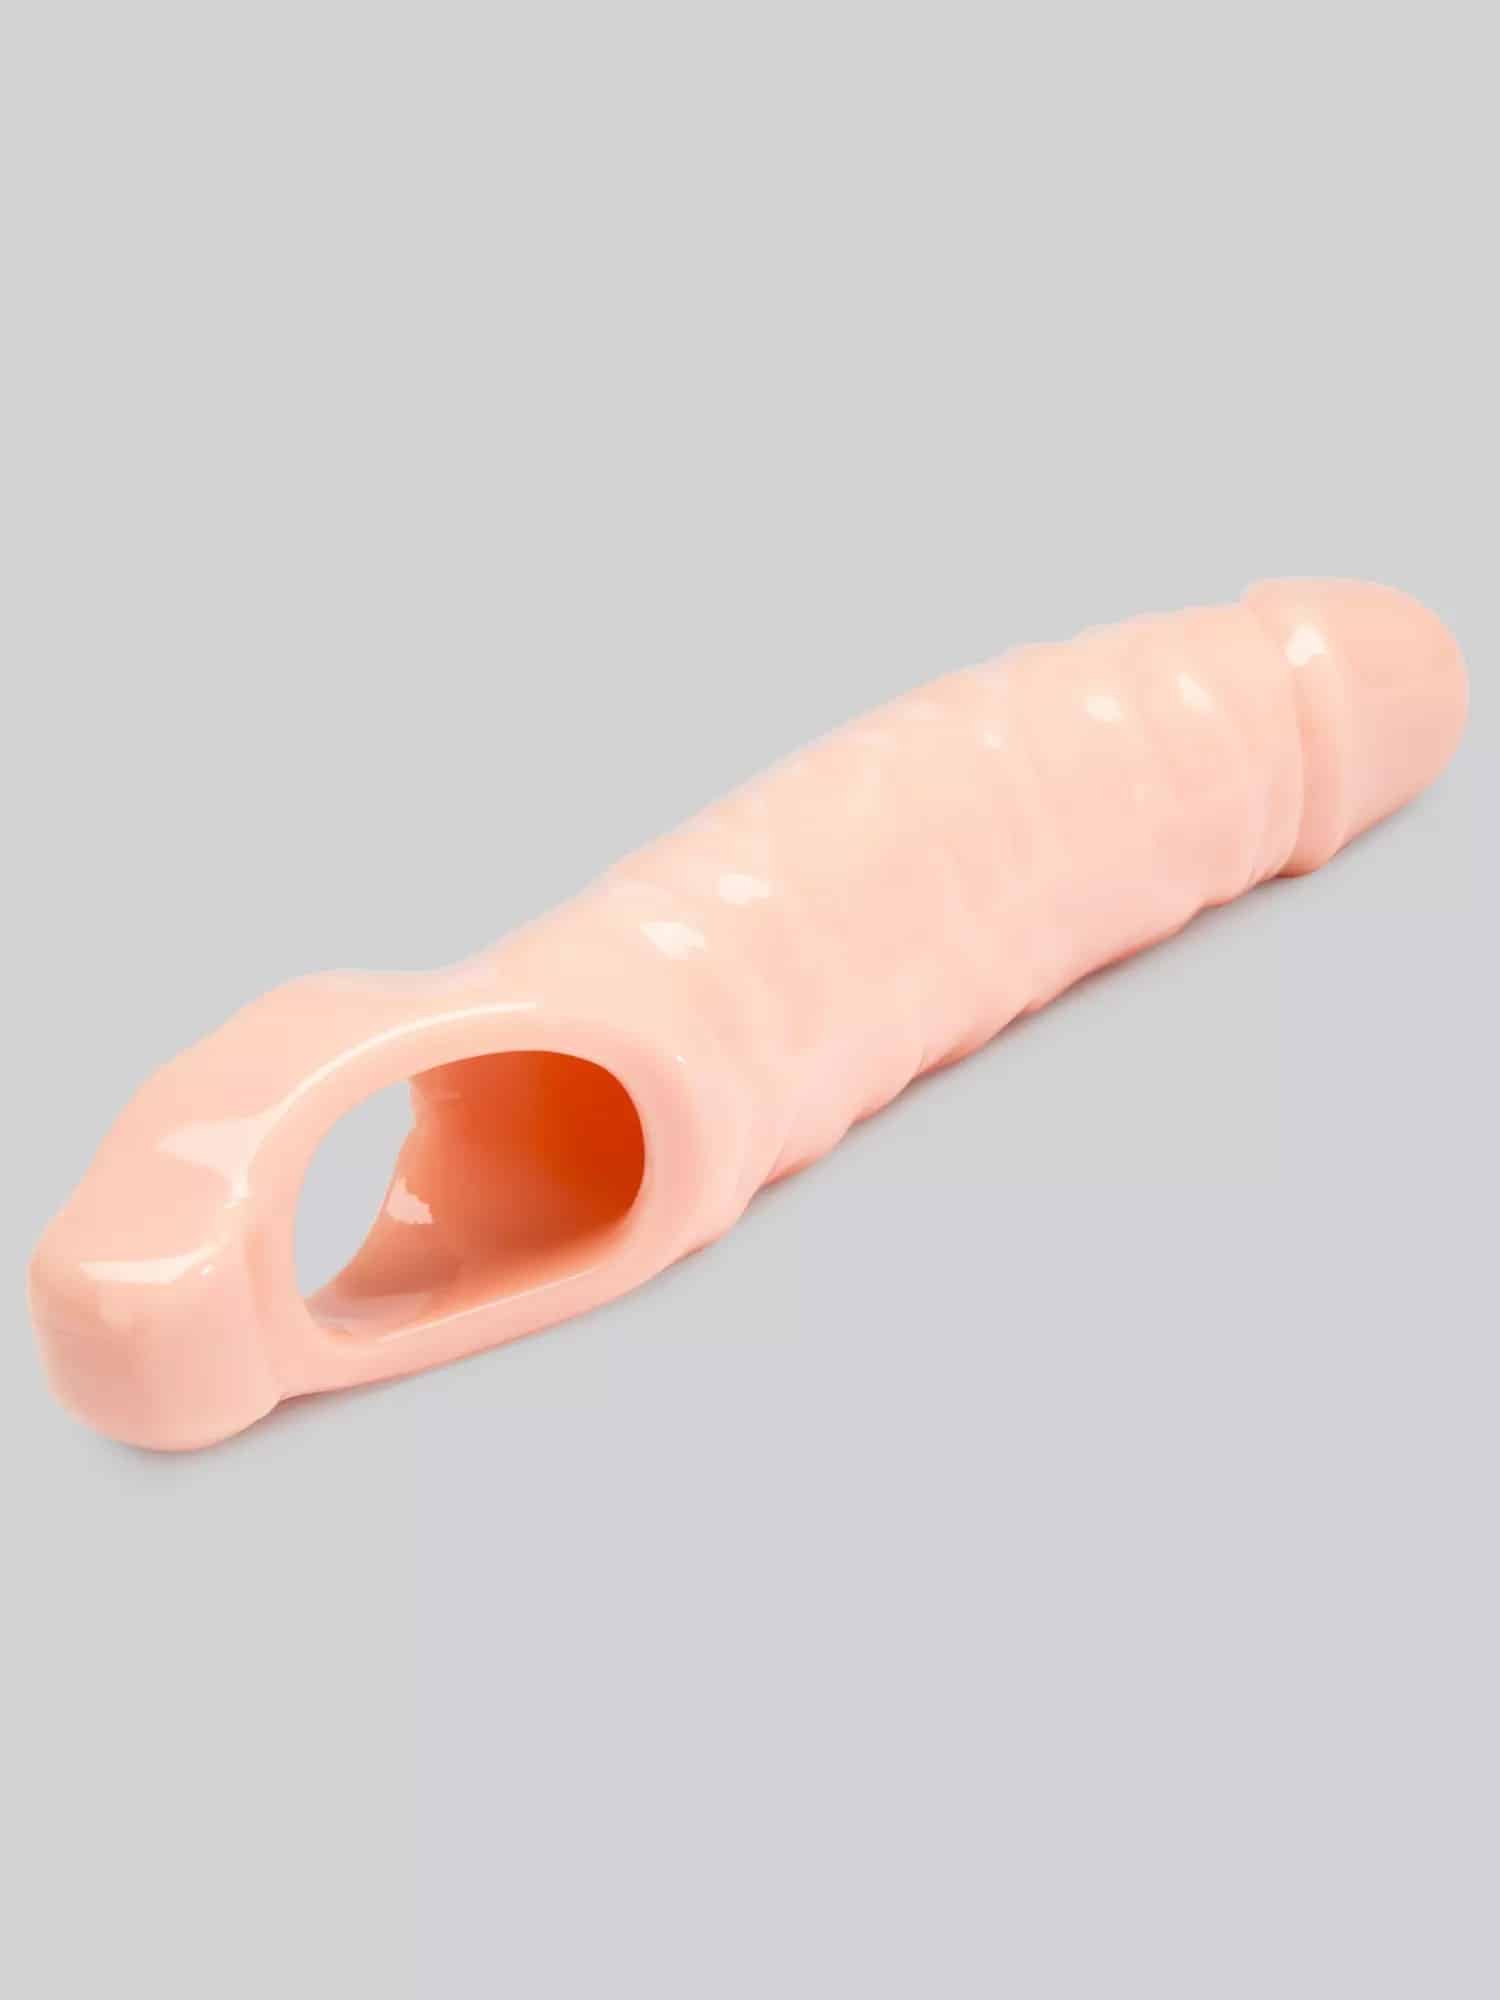 Lovehoney Mega Mighty 3 Extra Inches Penis Extender with Ball Loop			 			. Slide 3